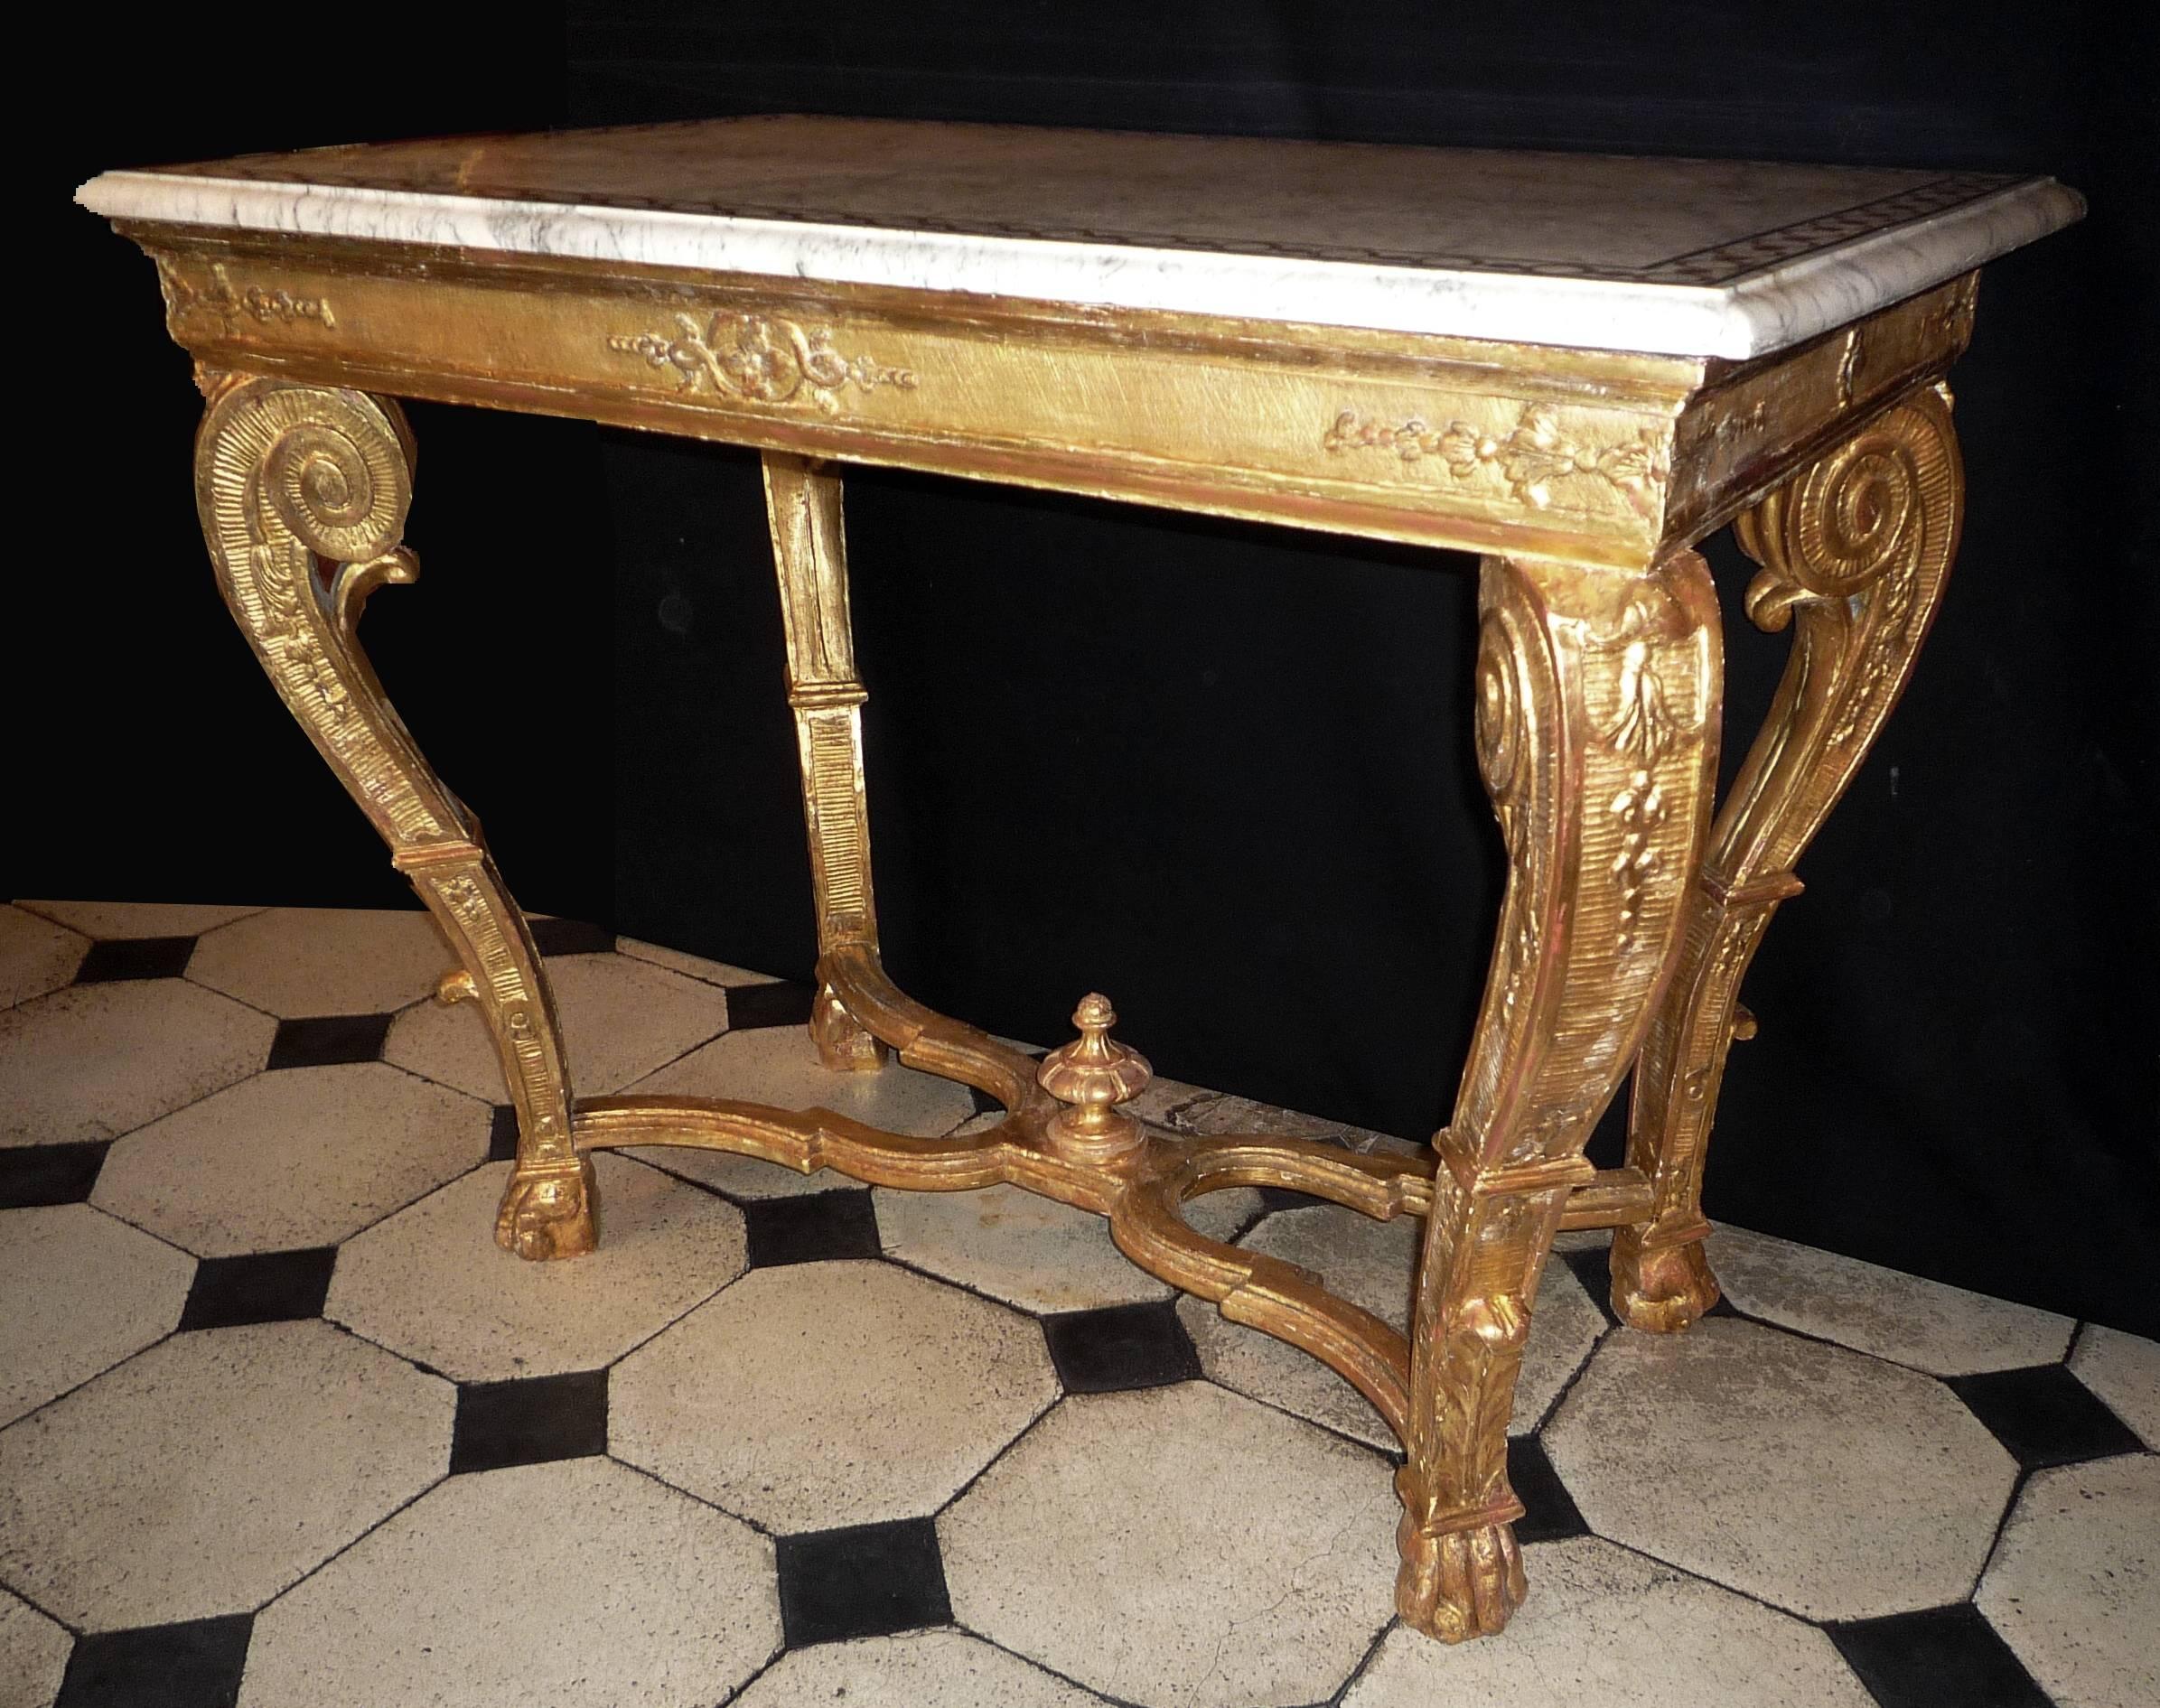 A fine French Louis XV carved and giltwood center table, with a 19th century marquetry marble top. May be originally a console table.